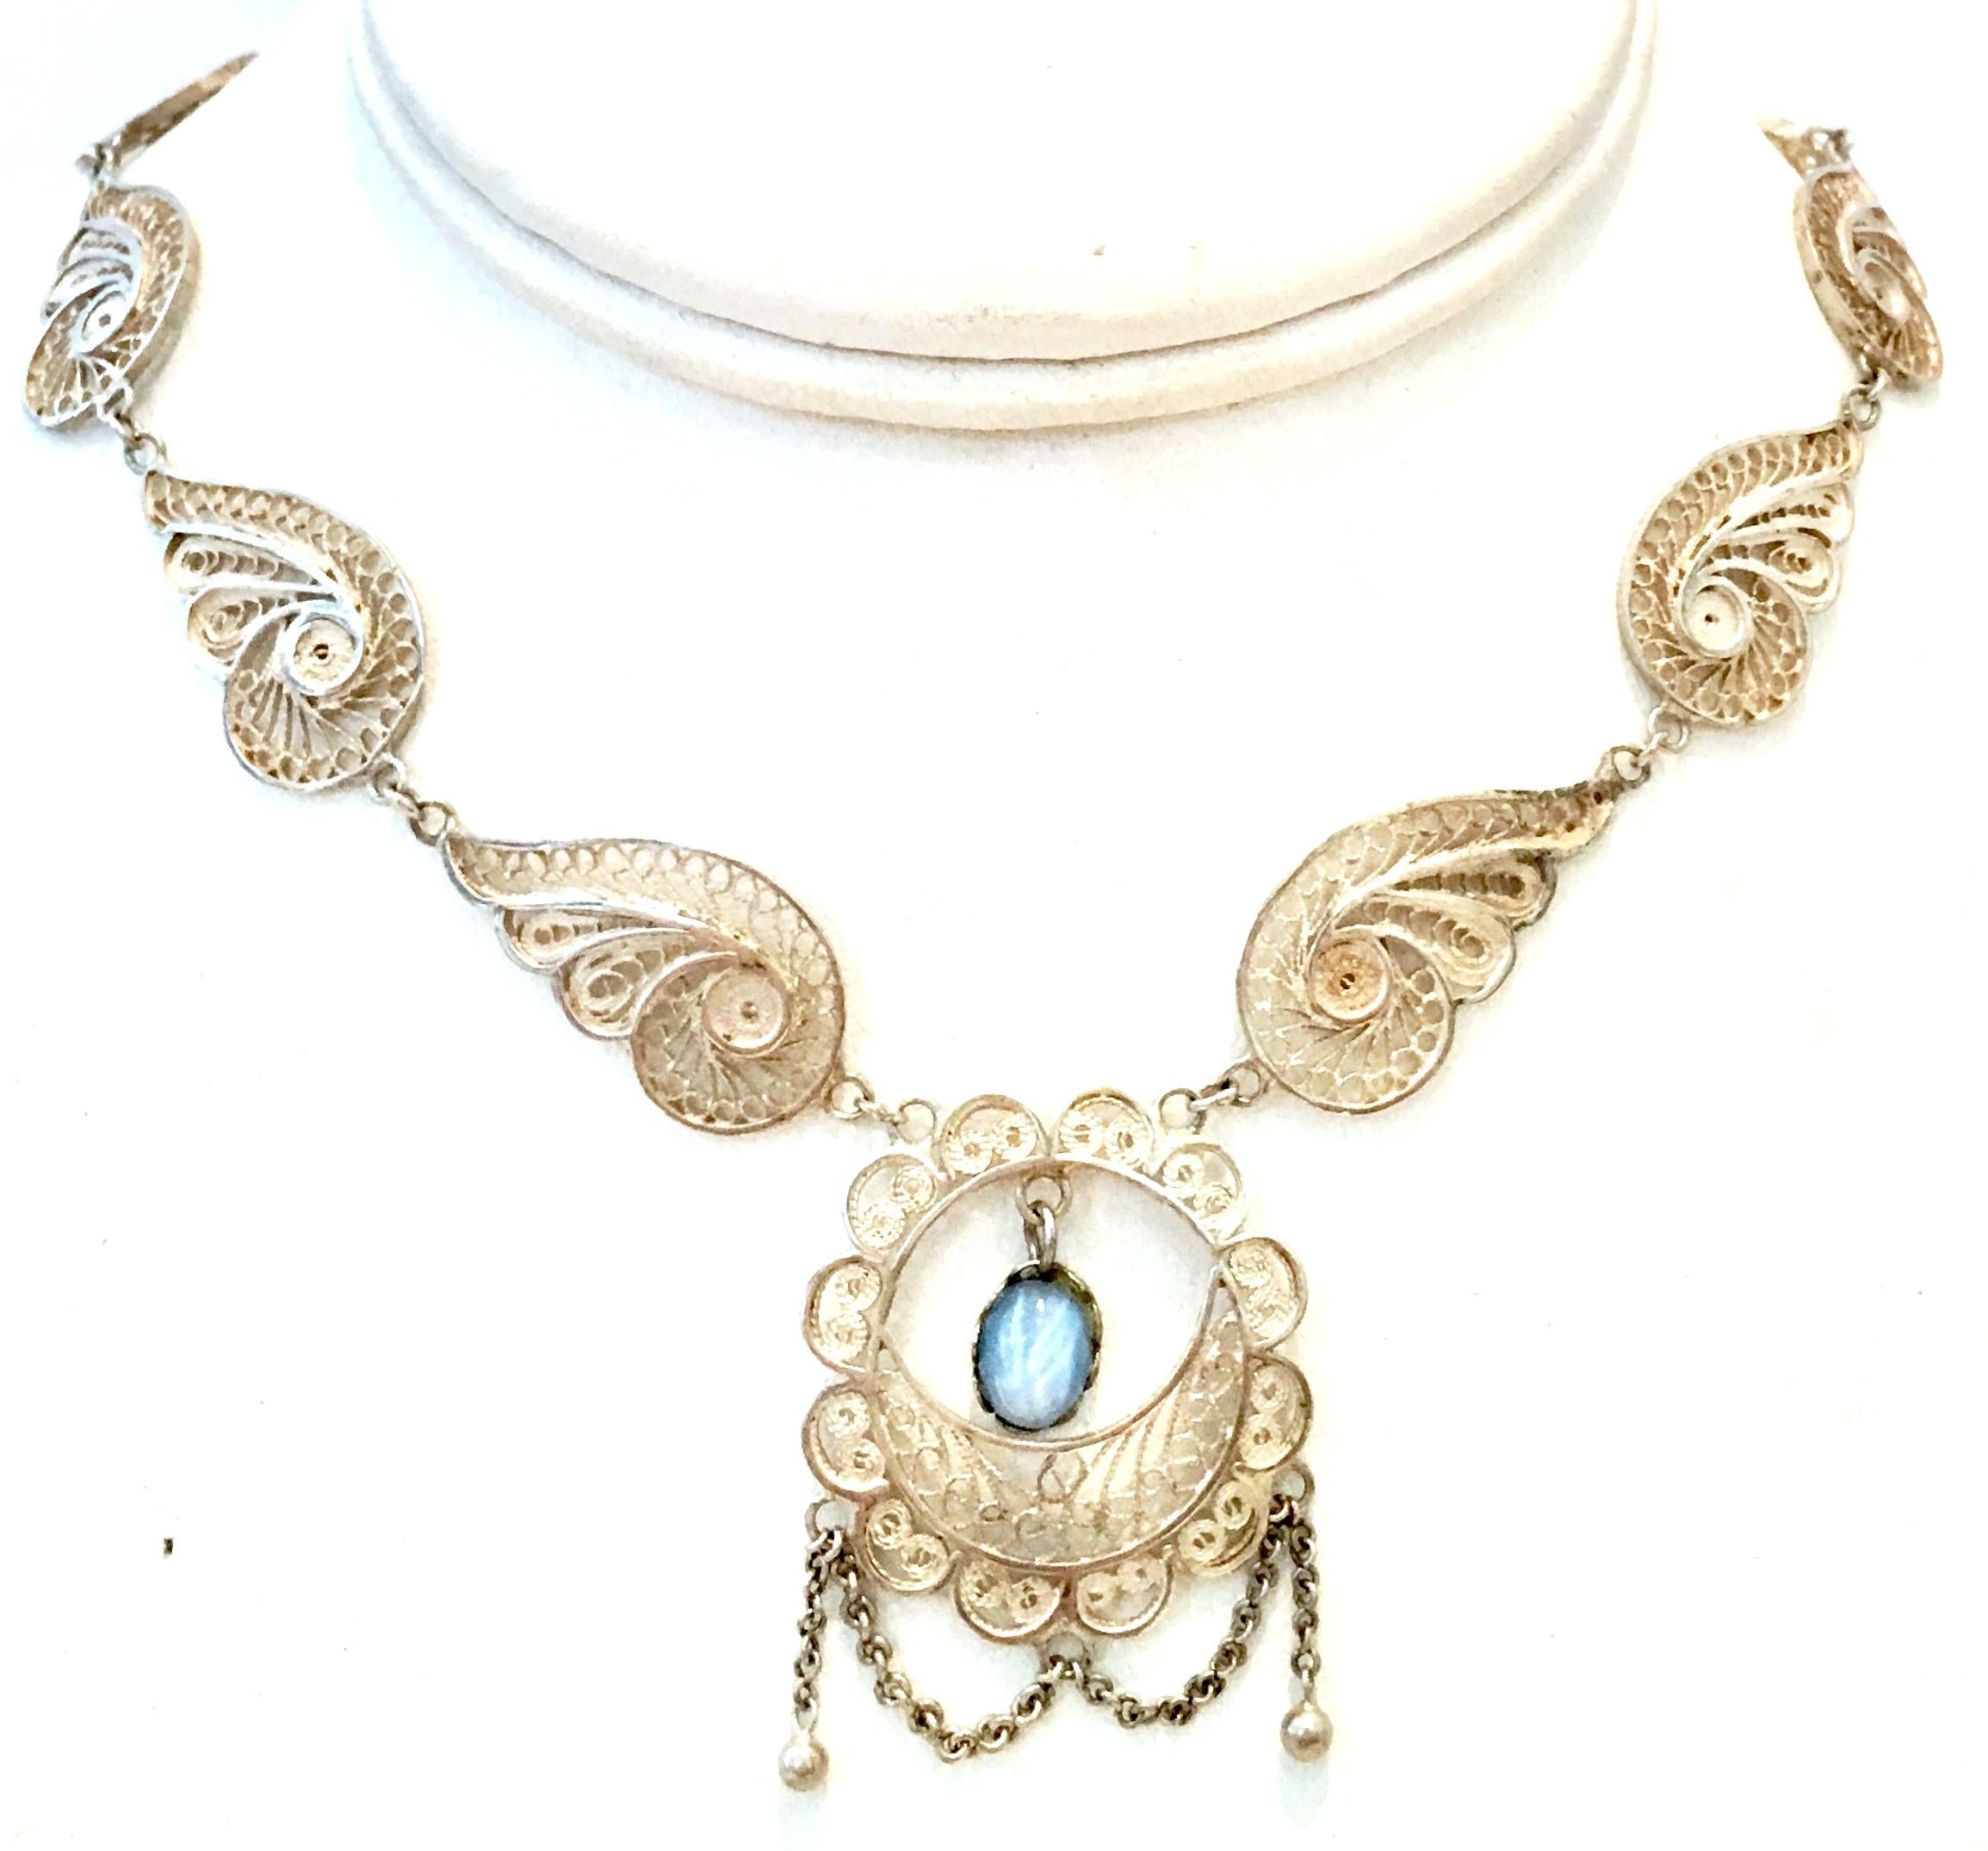 Antique Art Nouveau Sterling Silver Filigree & Moonstone Necklace. This one of a kind delicate and substantial artisan piece features a sterling silver necklace with intricate filigree feathered scroll detail and a single prong set moonstone